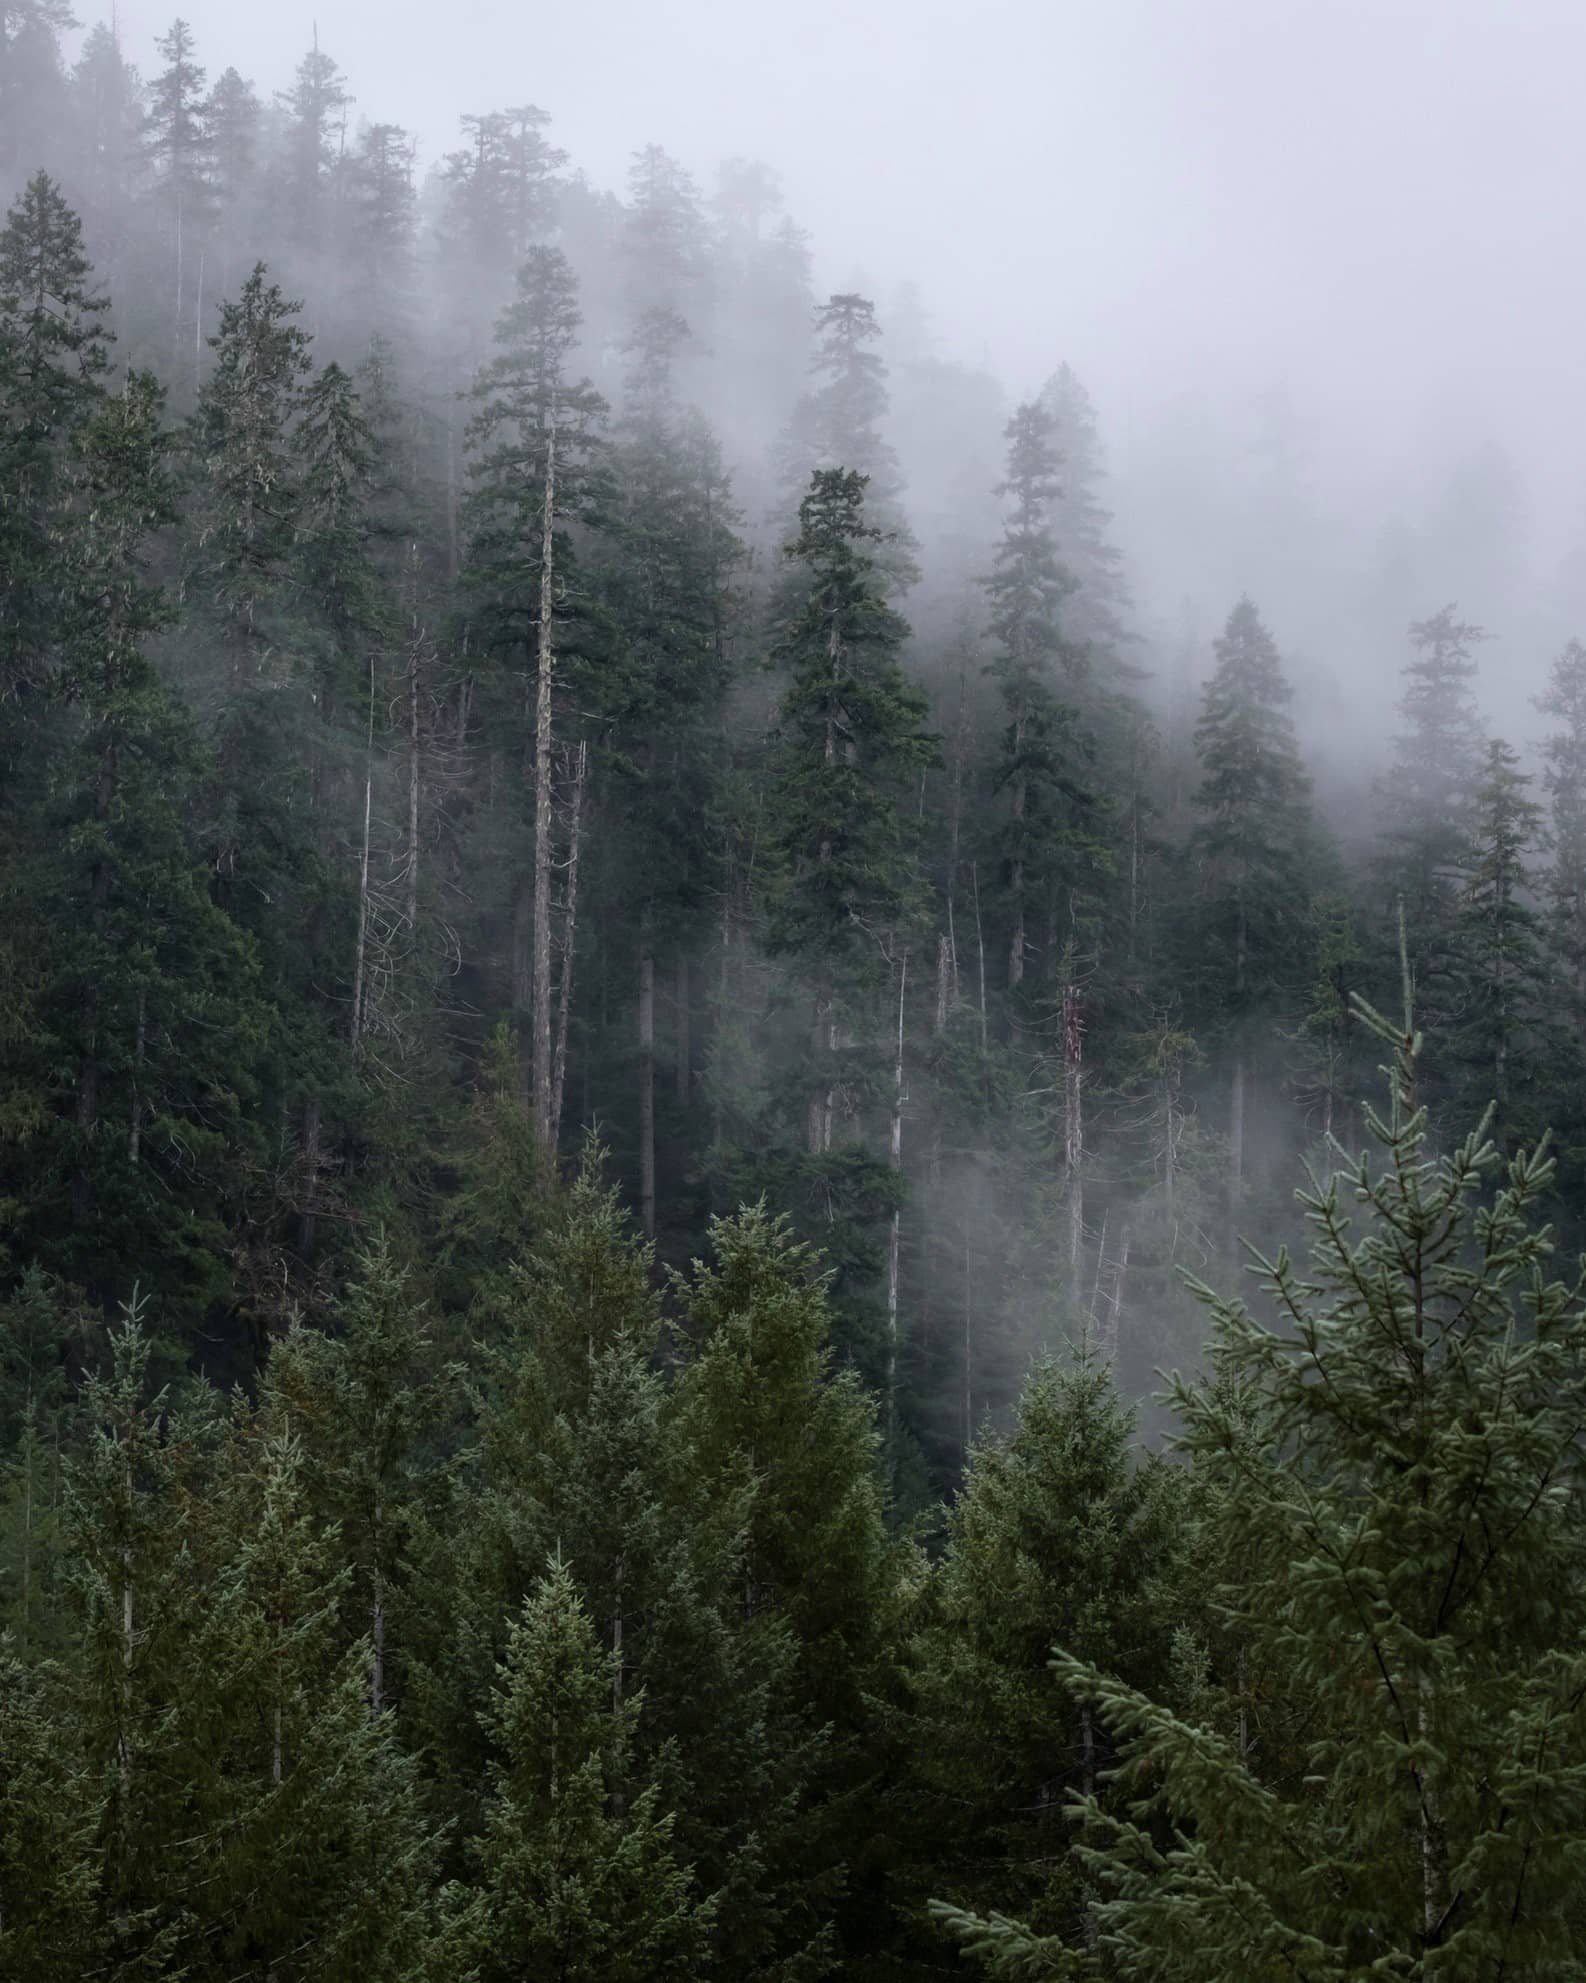 Pine trees surrounded by fog.